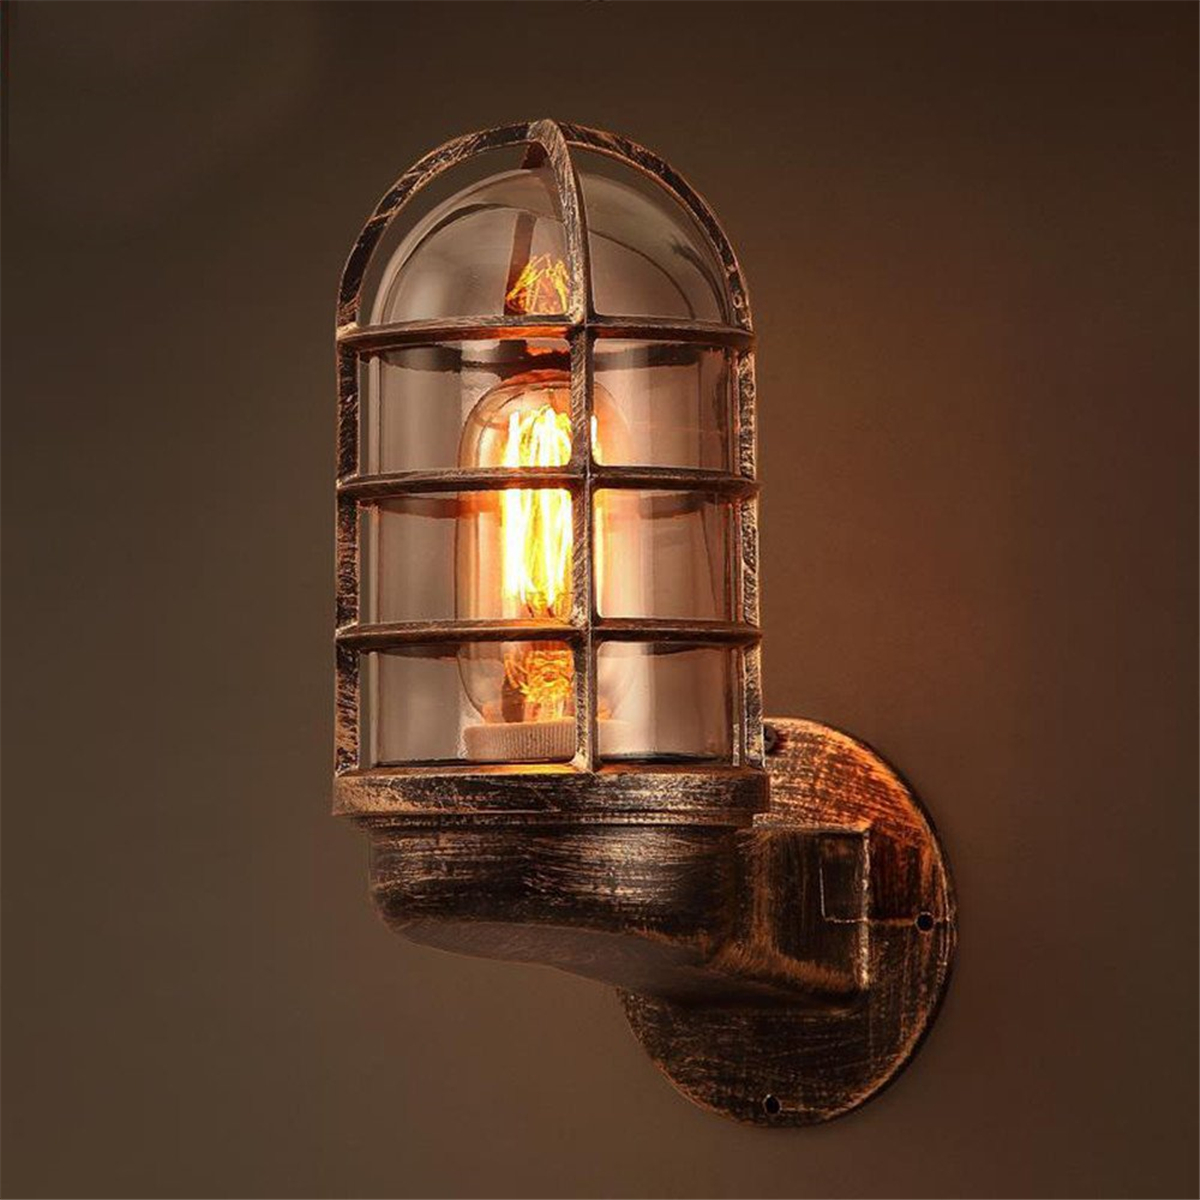 Vintage-Industrial-Unique-Wall-Lamp-Iron-Rustic-Copper-Steampunk-Lamp-Sconce-1635620-6